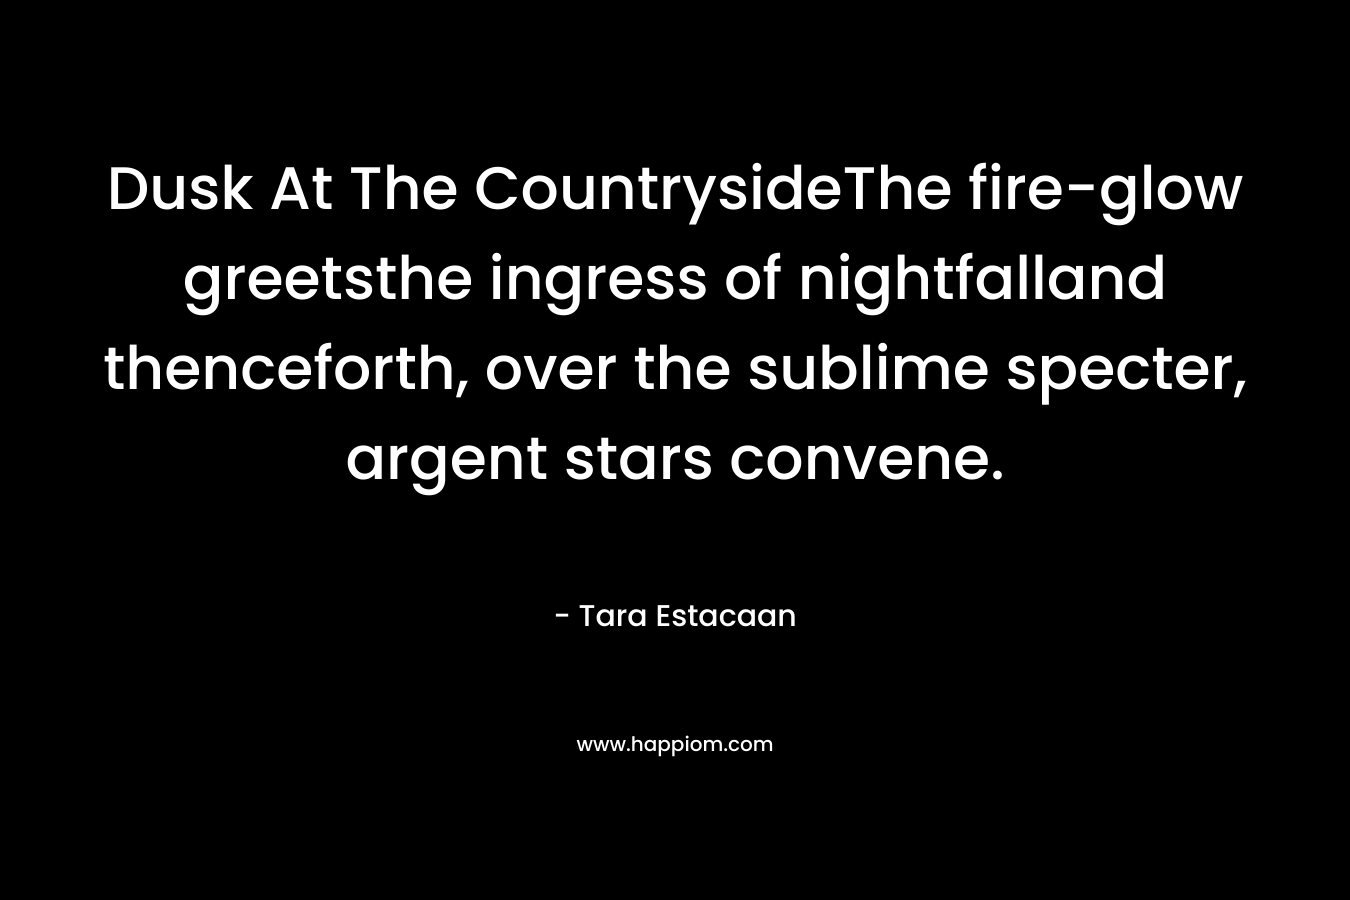 Dusk At The CountrysideThe fire-glow greetsthe ingress of nightfalland thenceforth, over the sublime specter, argent stars convene.